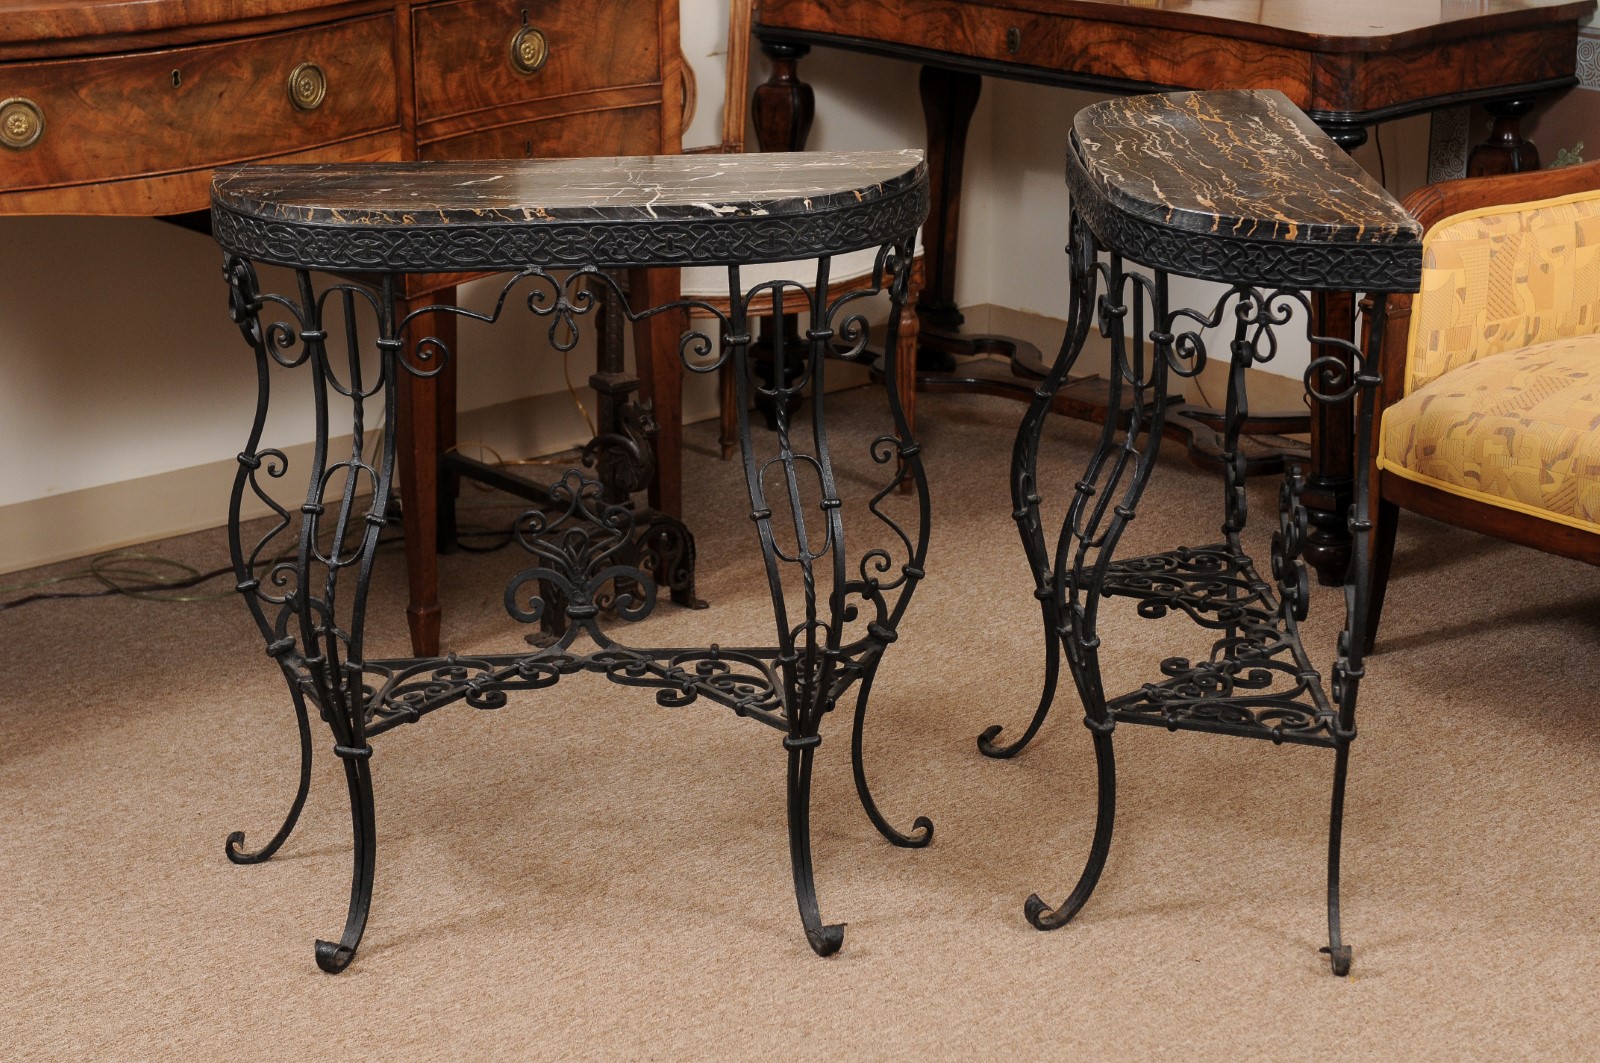 Pair of Iron Console Tables with Cabriole Legs, Scroll Detail, & Black